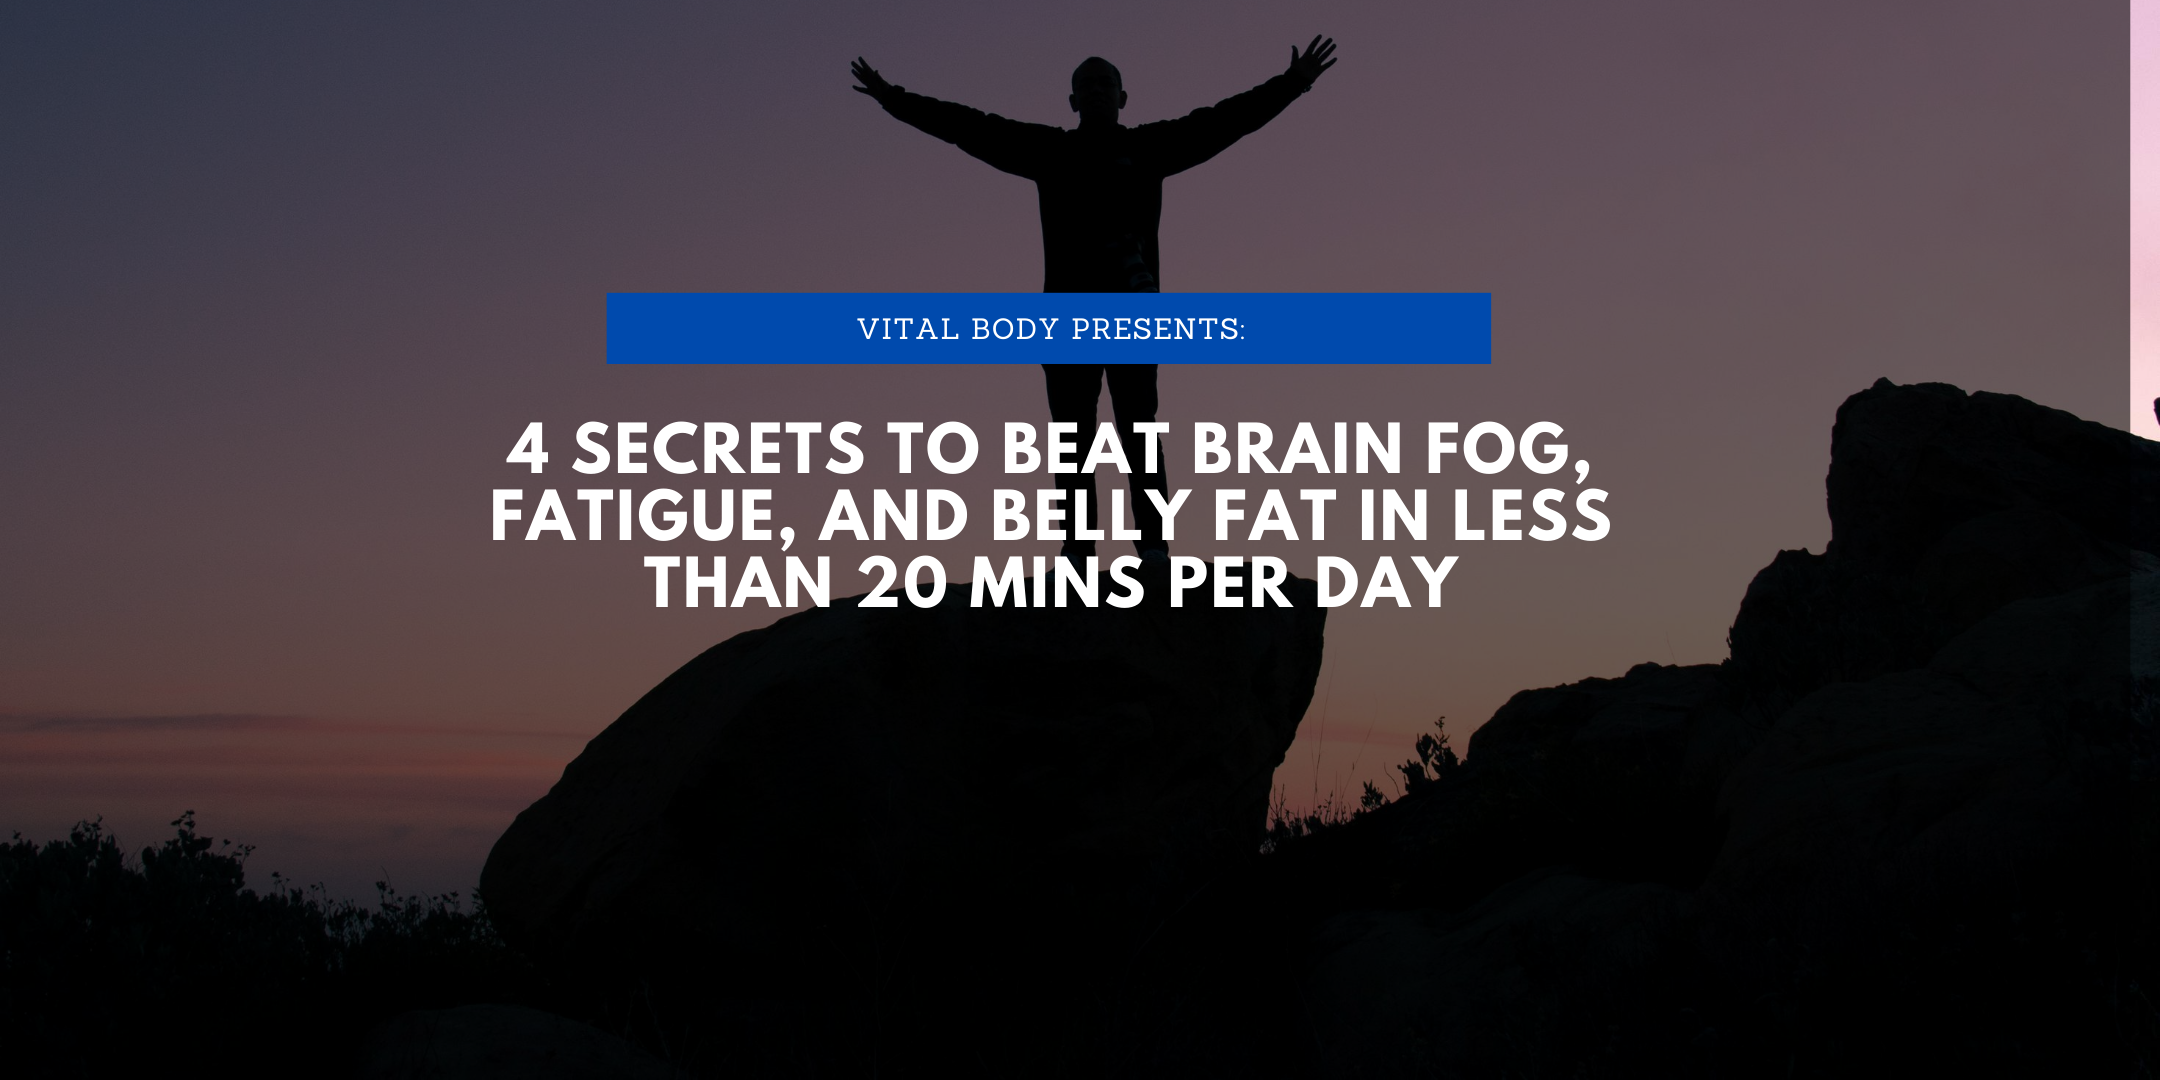 4 Secrets to Eliminate fatigue, brain fog, and fat in less than 20 mins/day